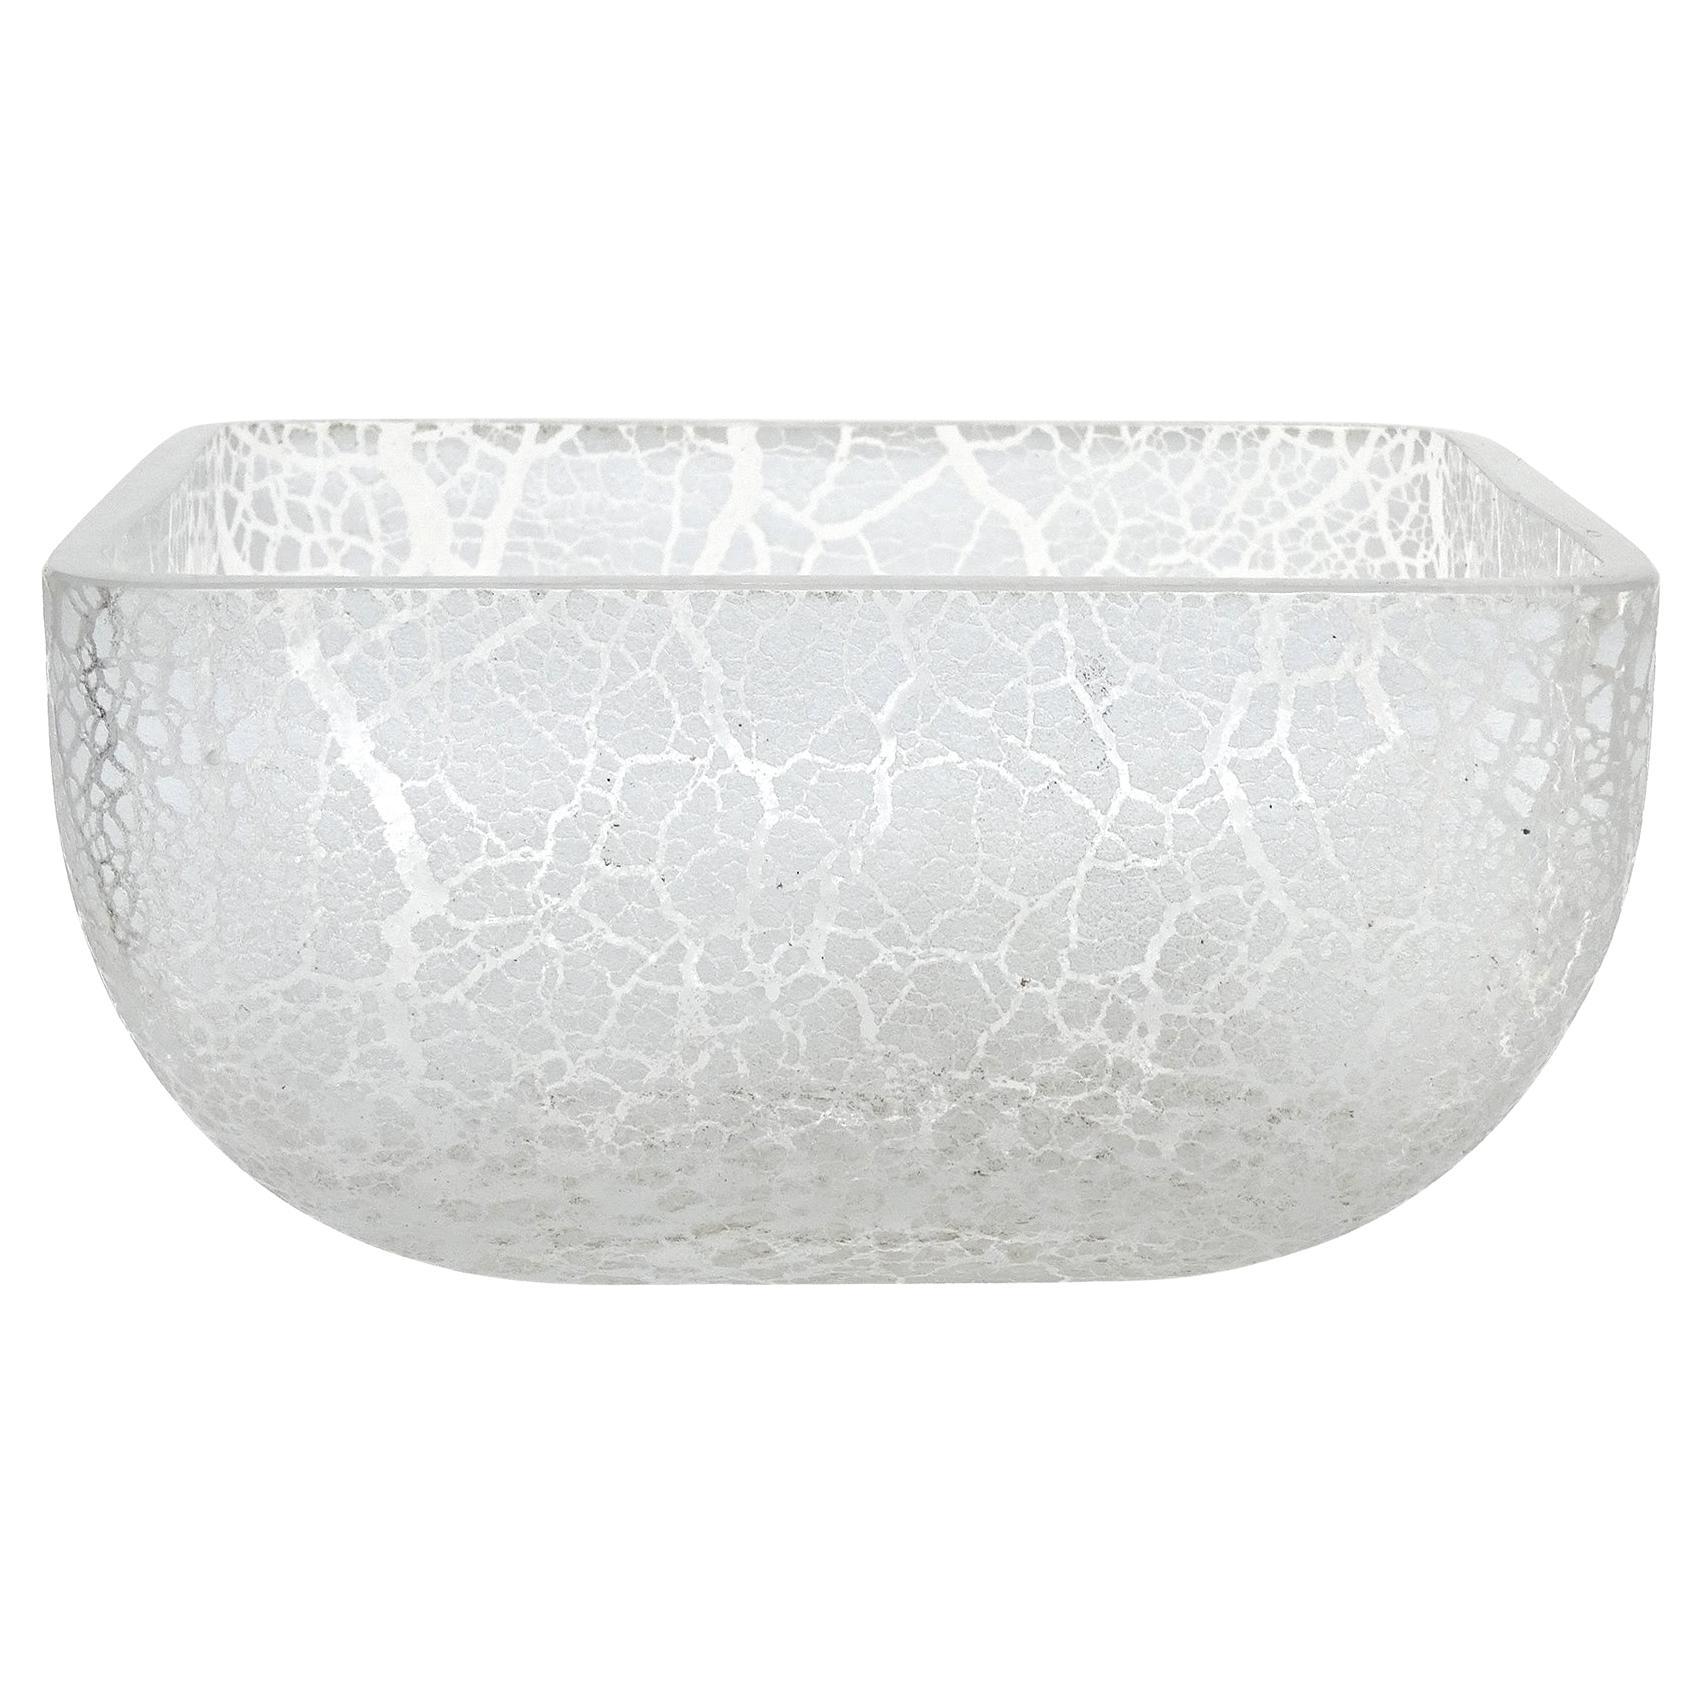 Barbini Murano Signed White Scavo Surface Texture Italian Art Glass Candy Bowl For Sale